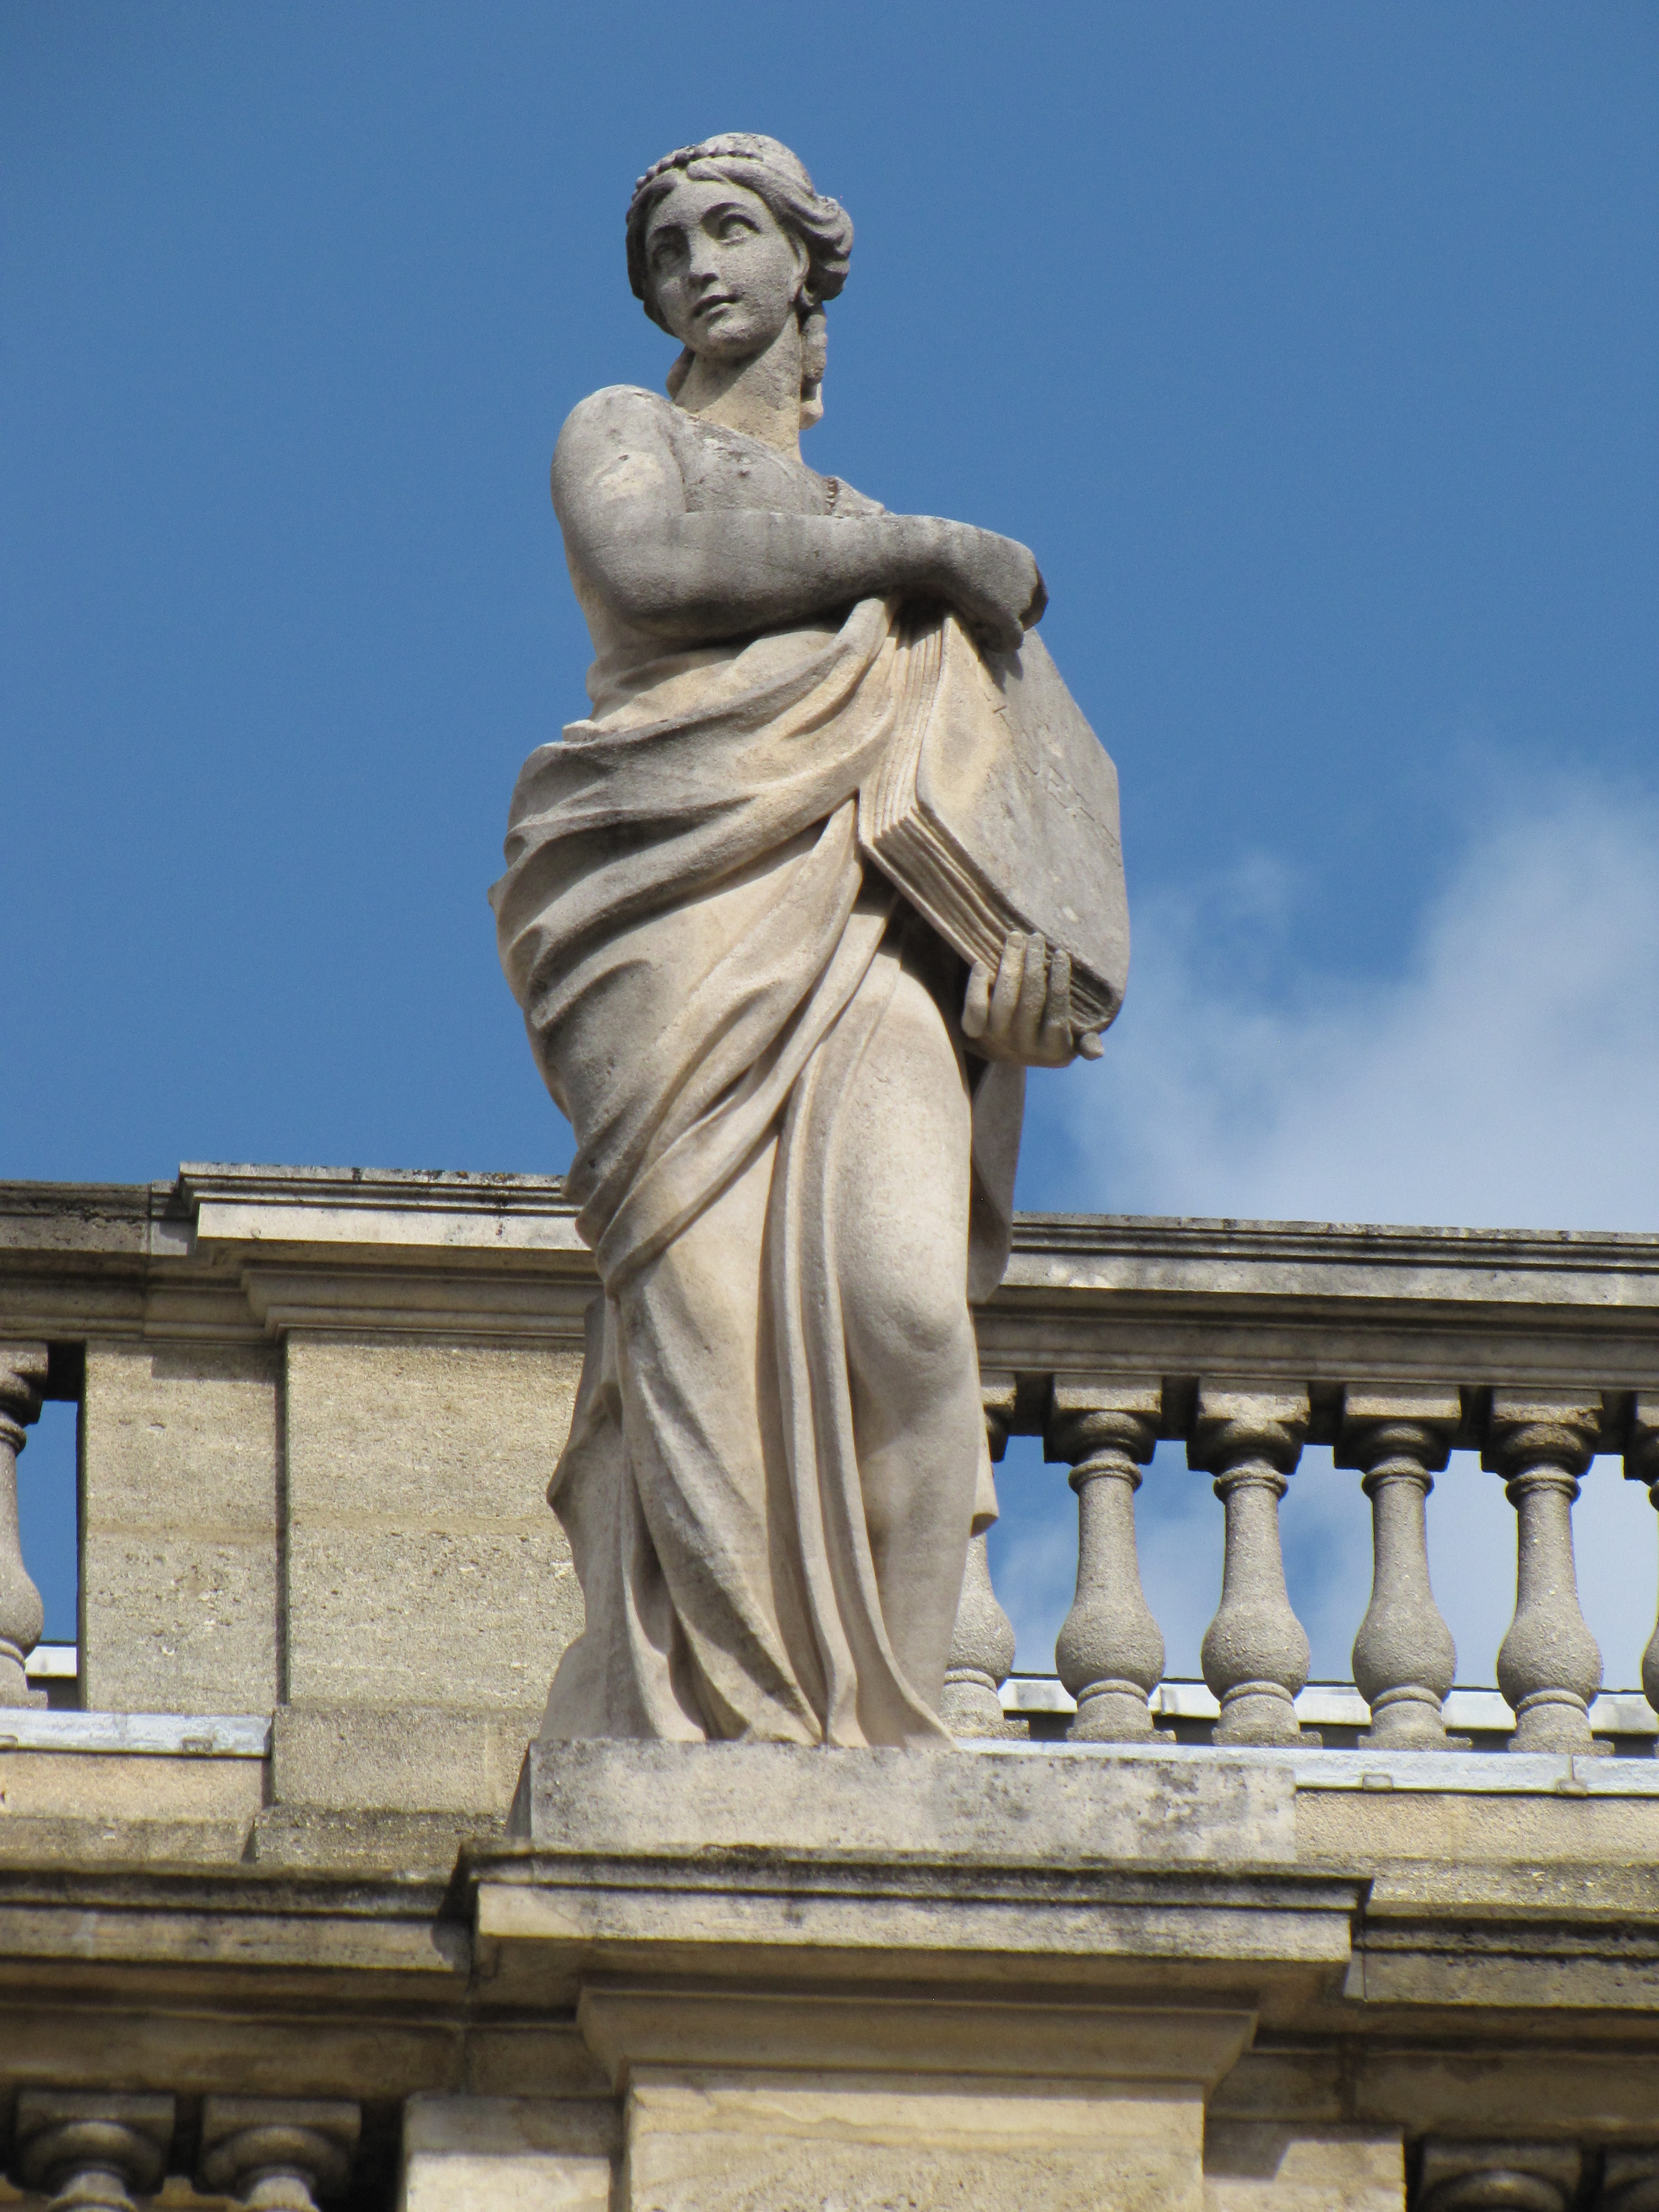 One can find statues of goddesses and nymphs at the Bordeaux opera house. (Photo: Hanna Tervanotko)